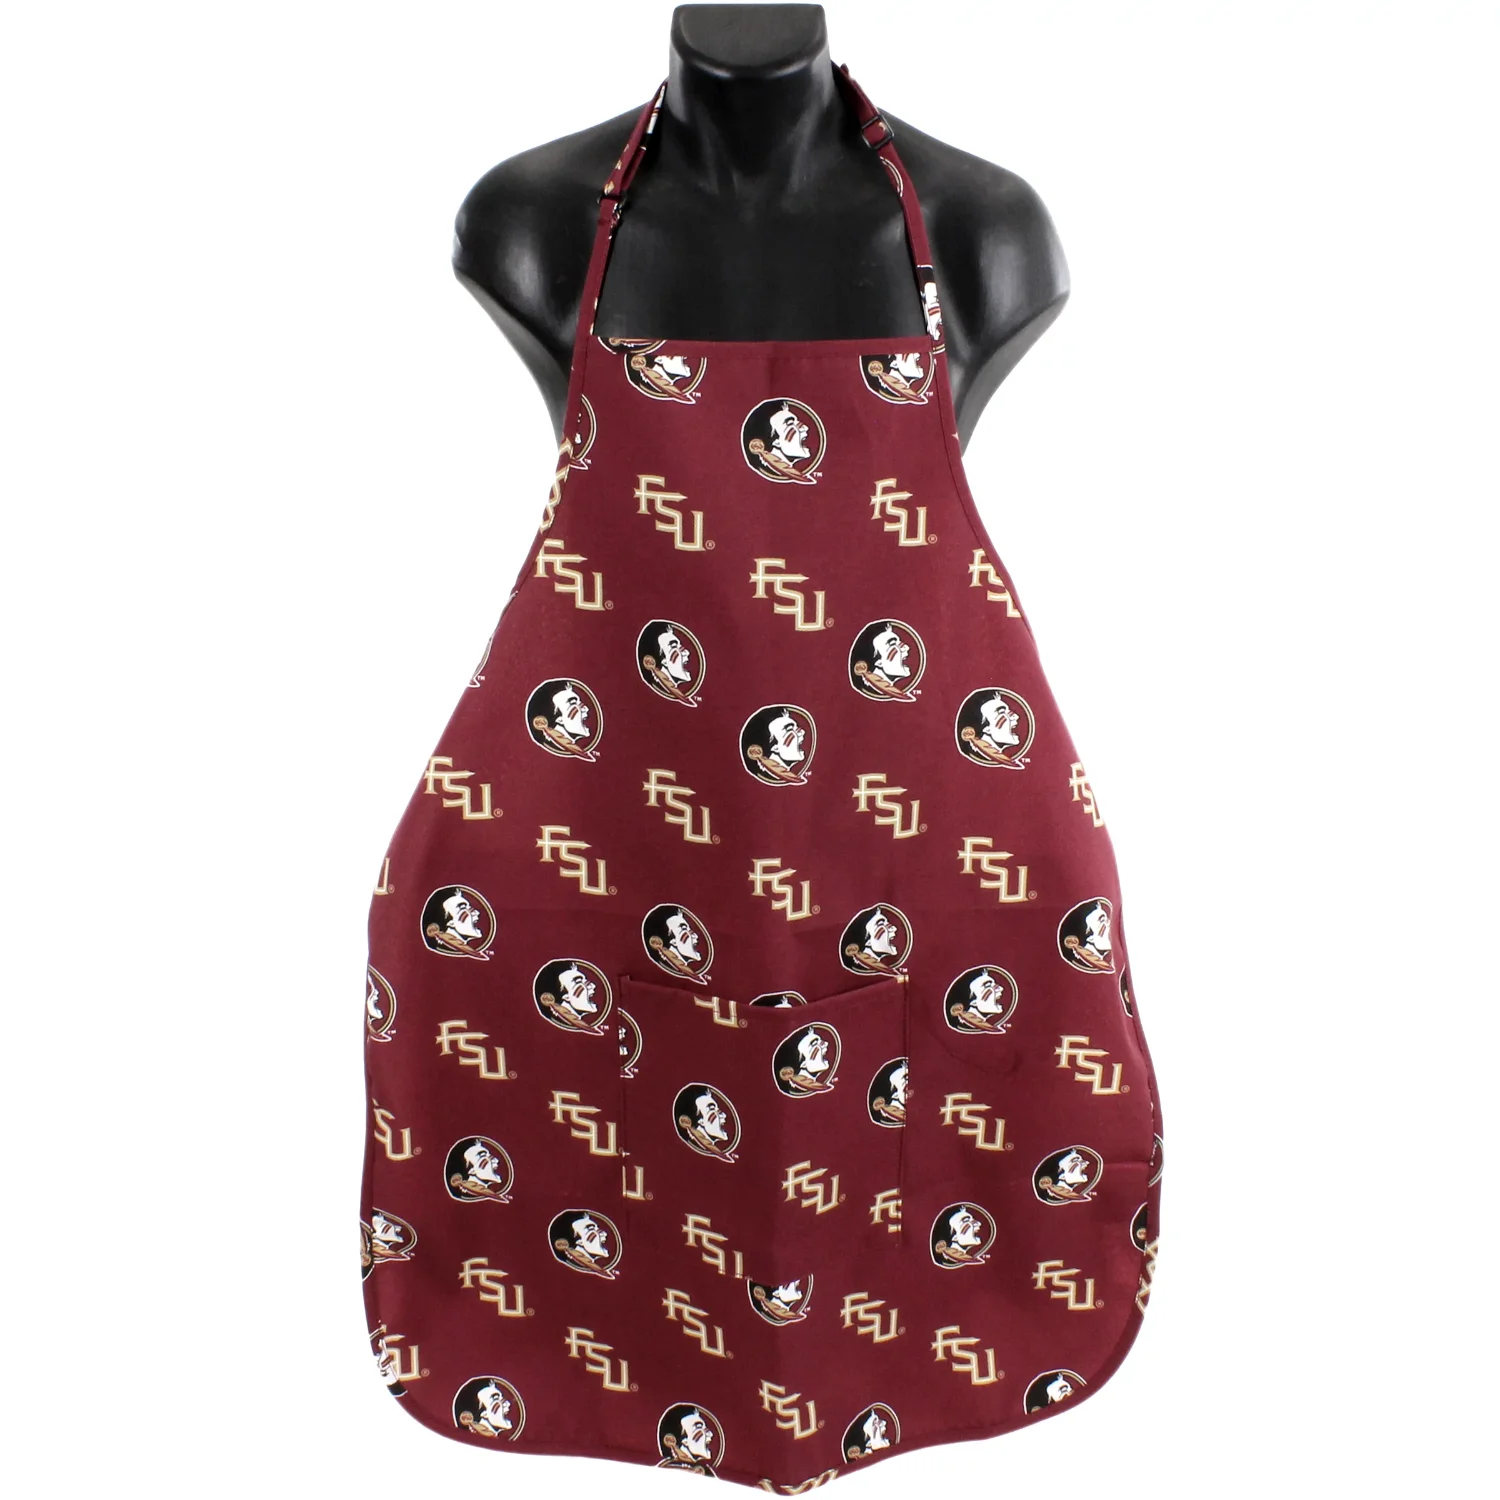 

Florida State Seminoles Tailgating or Grilling Apron With 9" Pocket, Fully Adjustable